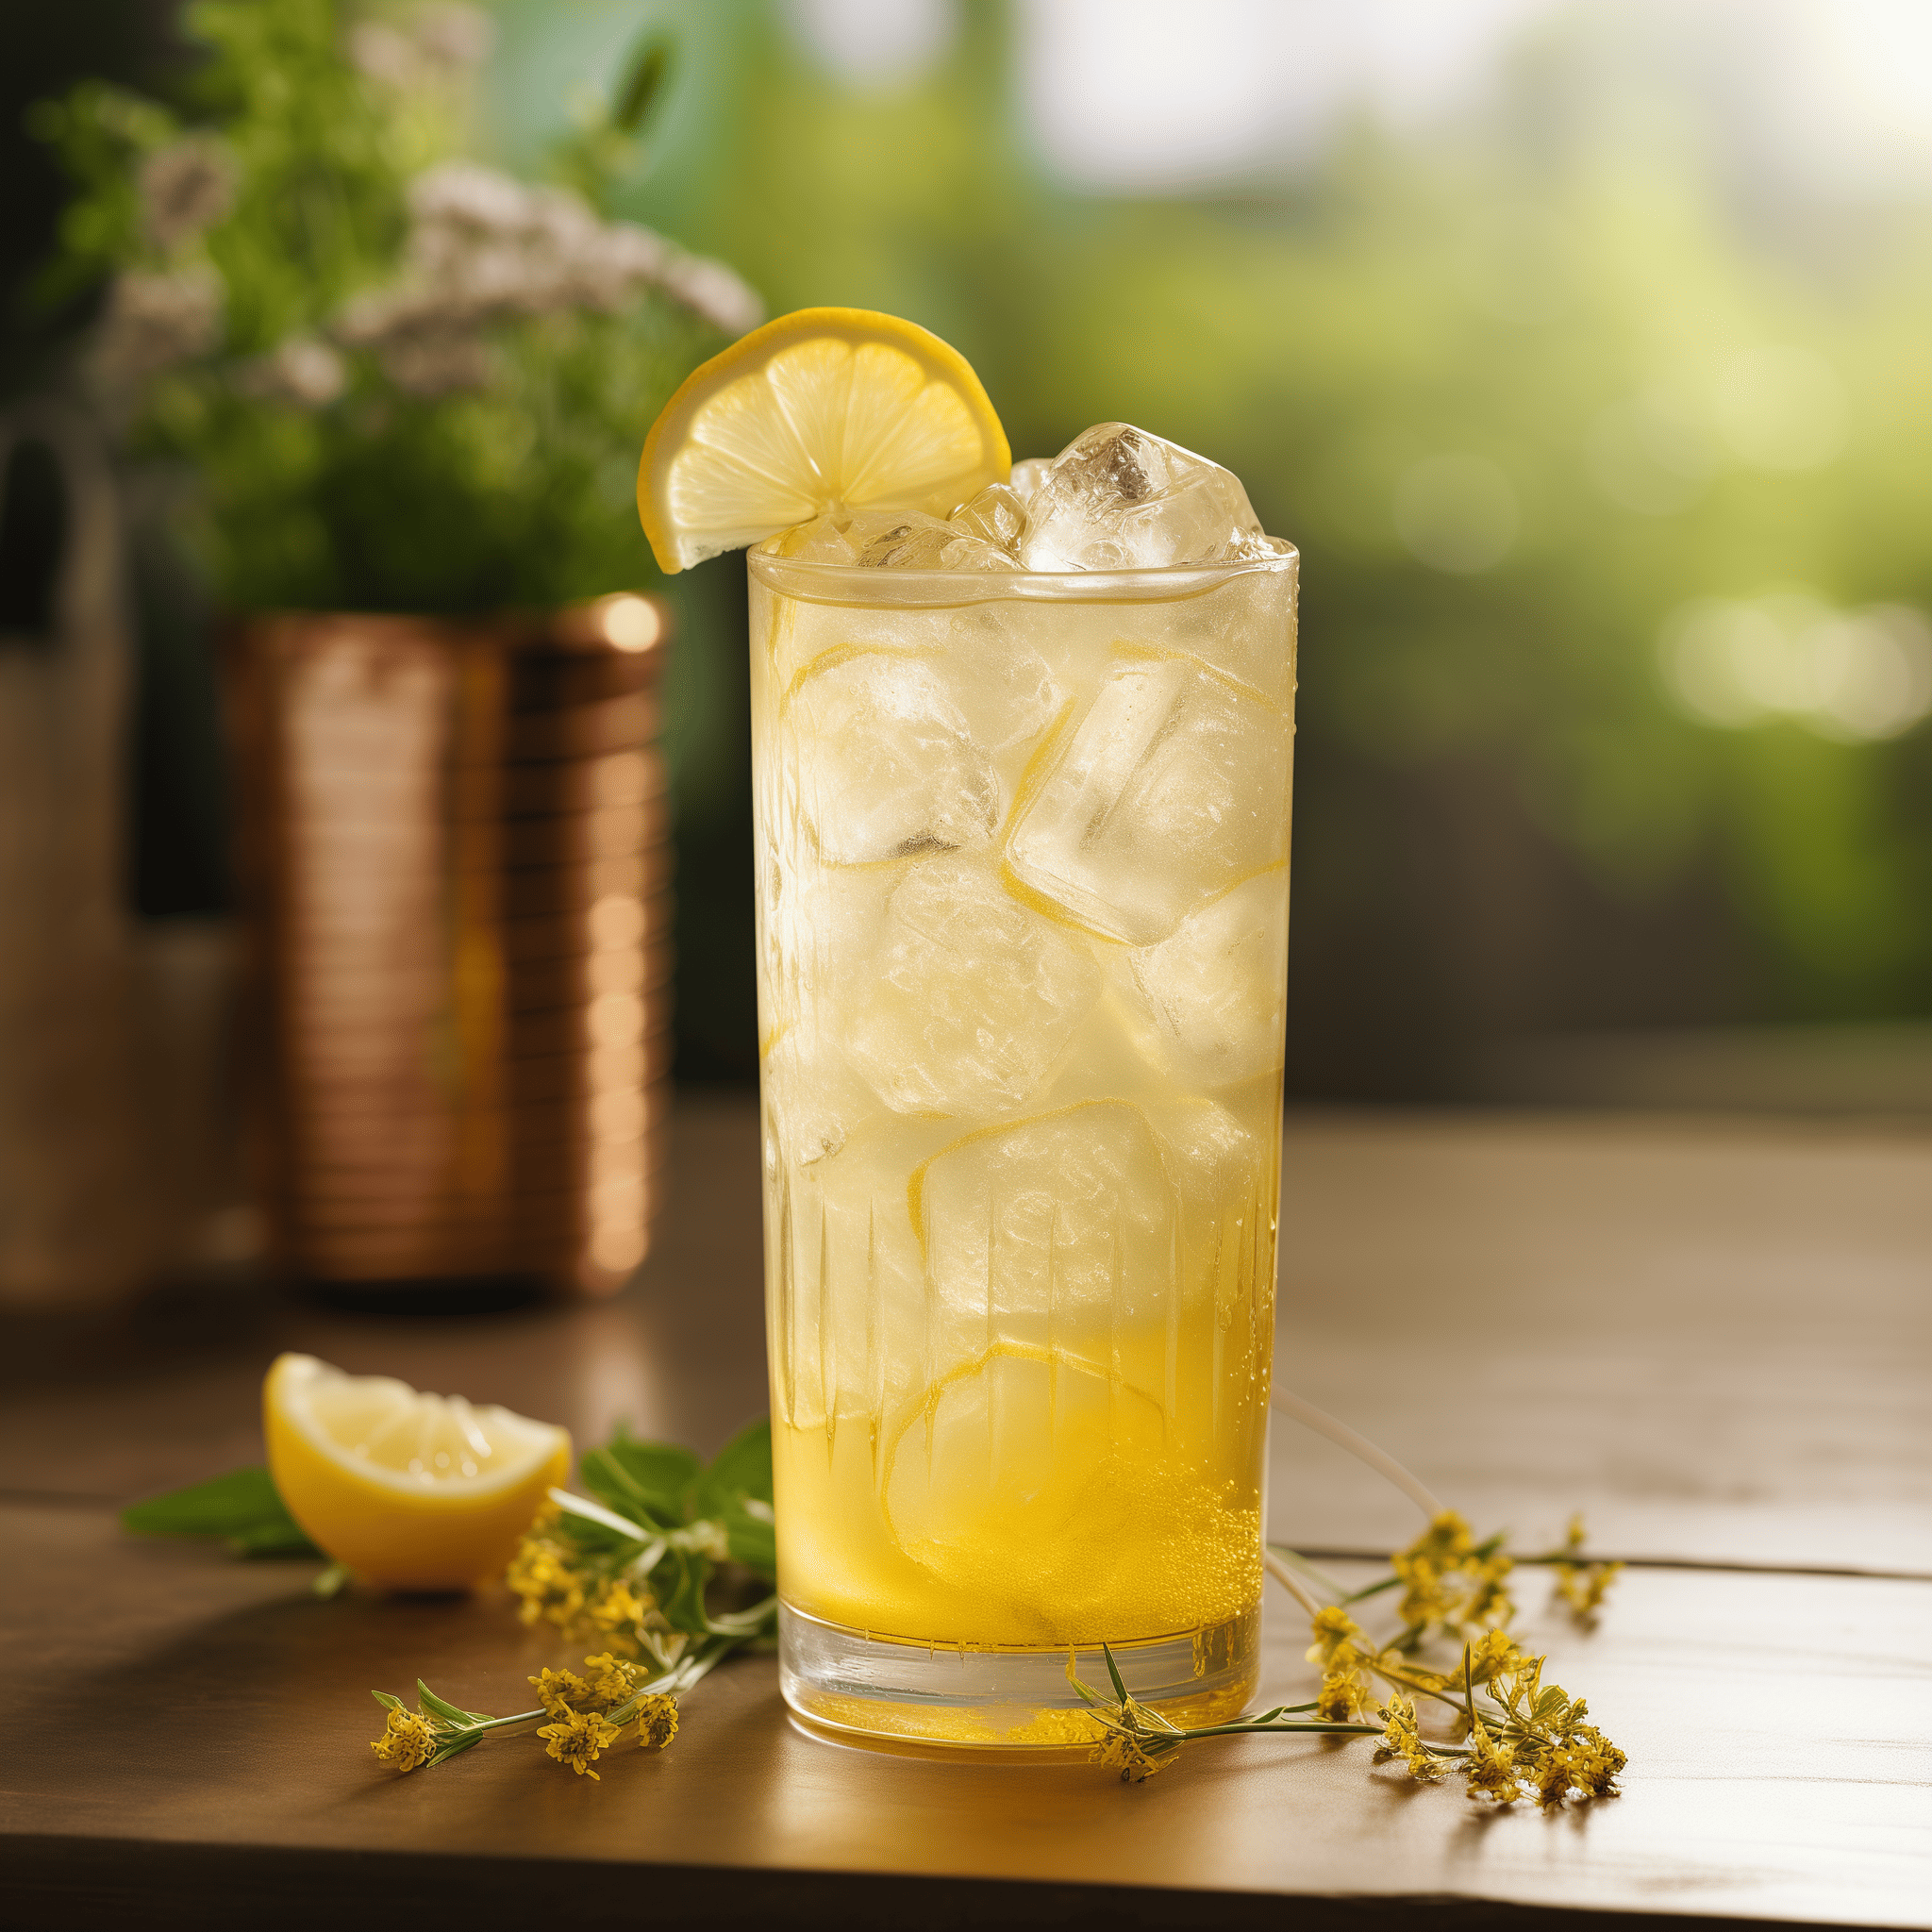 Honey Gin and Tonic Cocktail Recipe - The Honey Gin and Tonic is a harmonious blend of sweet and bitter, with the honey's rich floral notes balancing the sharpness of the tonic and the complex flavors of the gin. It's refreshing, slightly sweet, with a botanical complexity and a crisp finish.